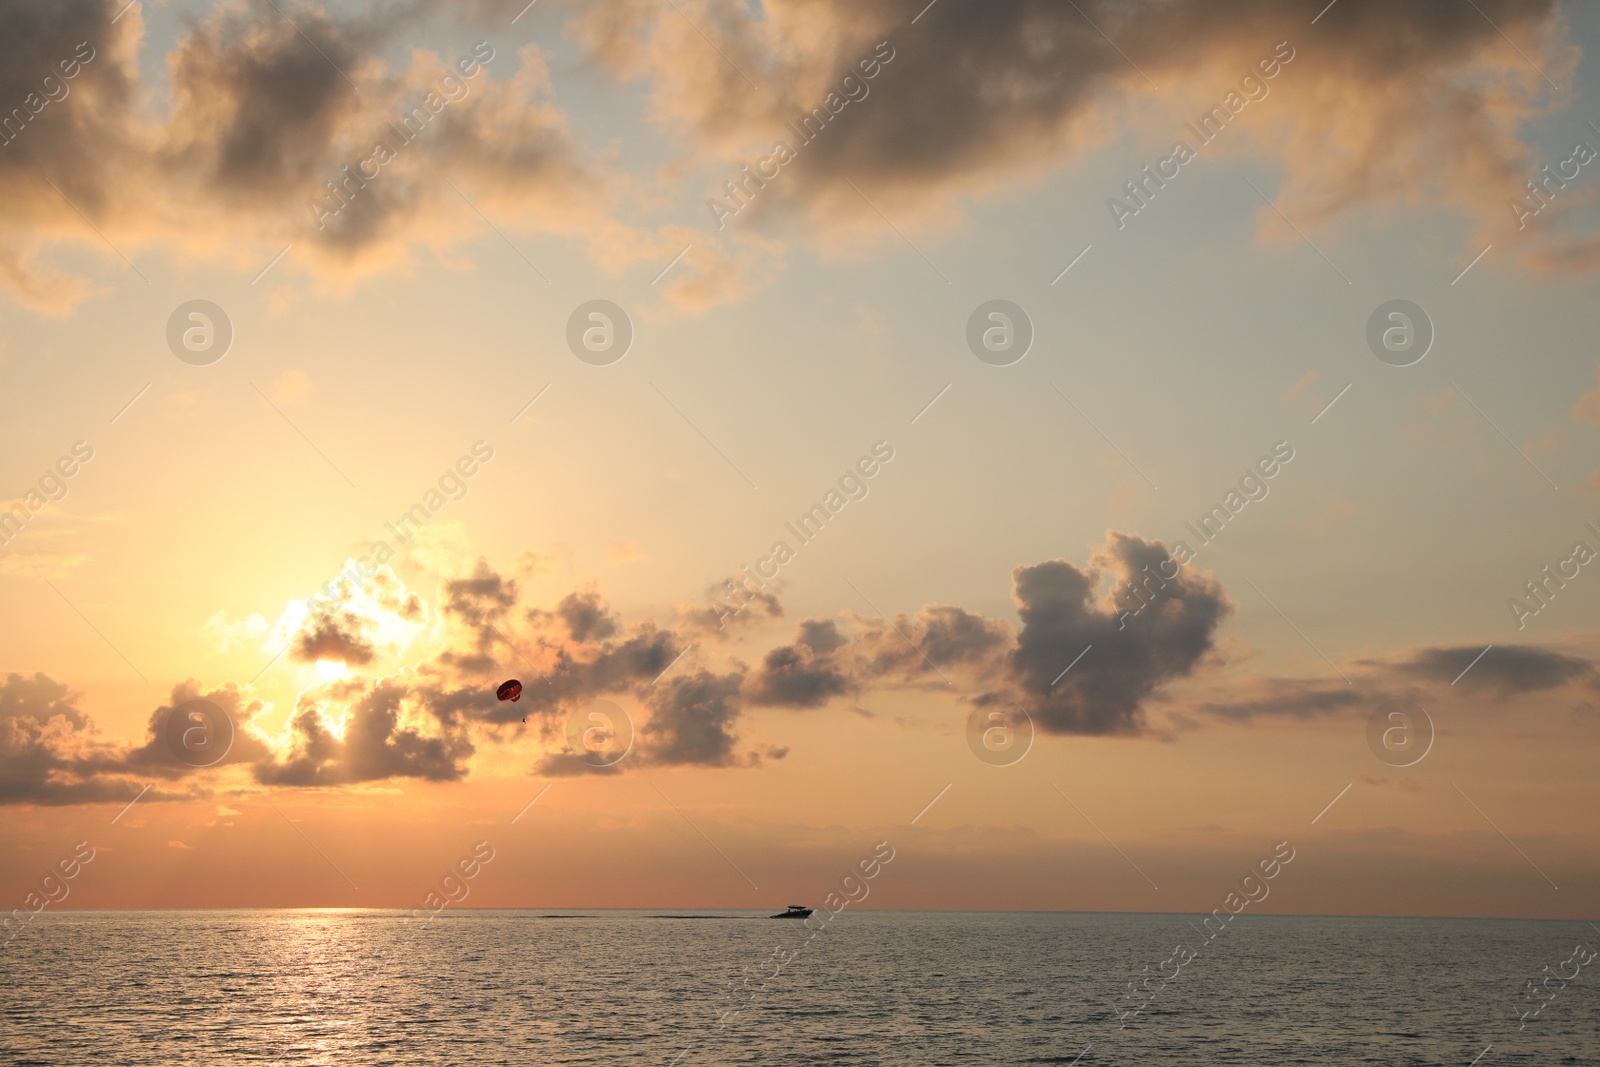 Photo of Picturesque view of beautiful sea and people parasailing at sunset